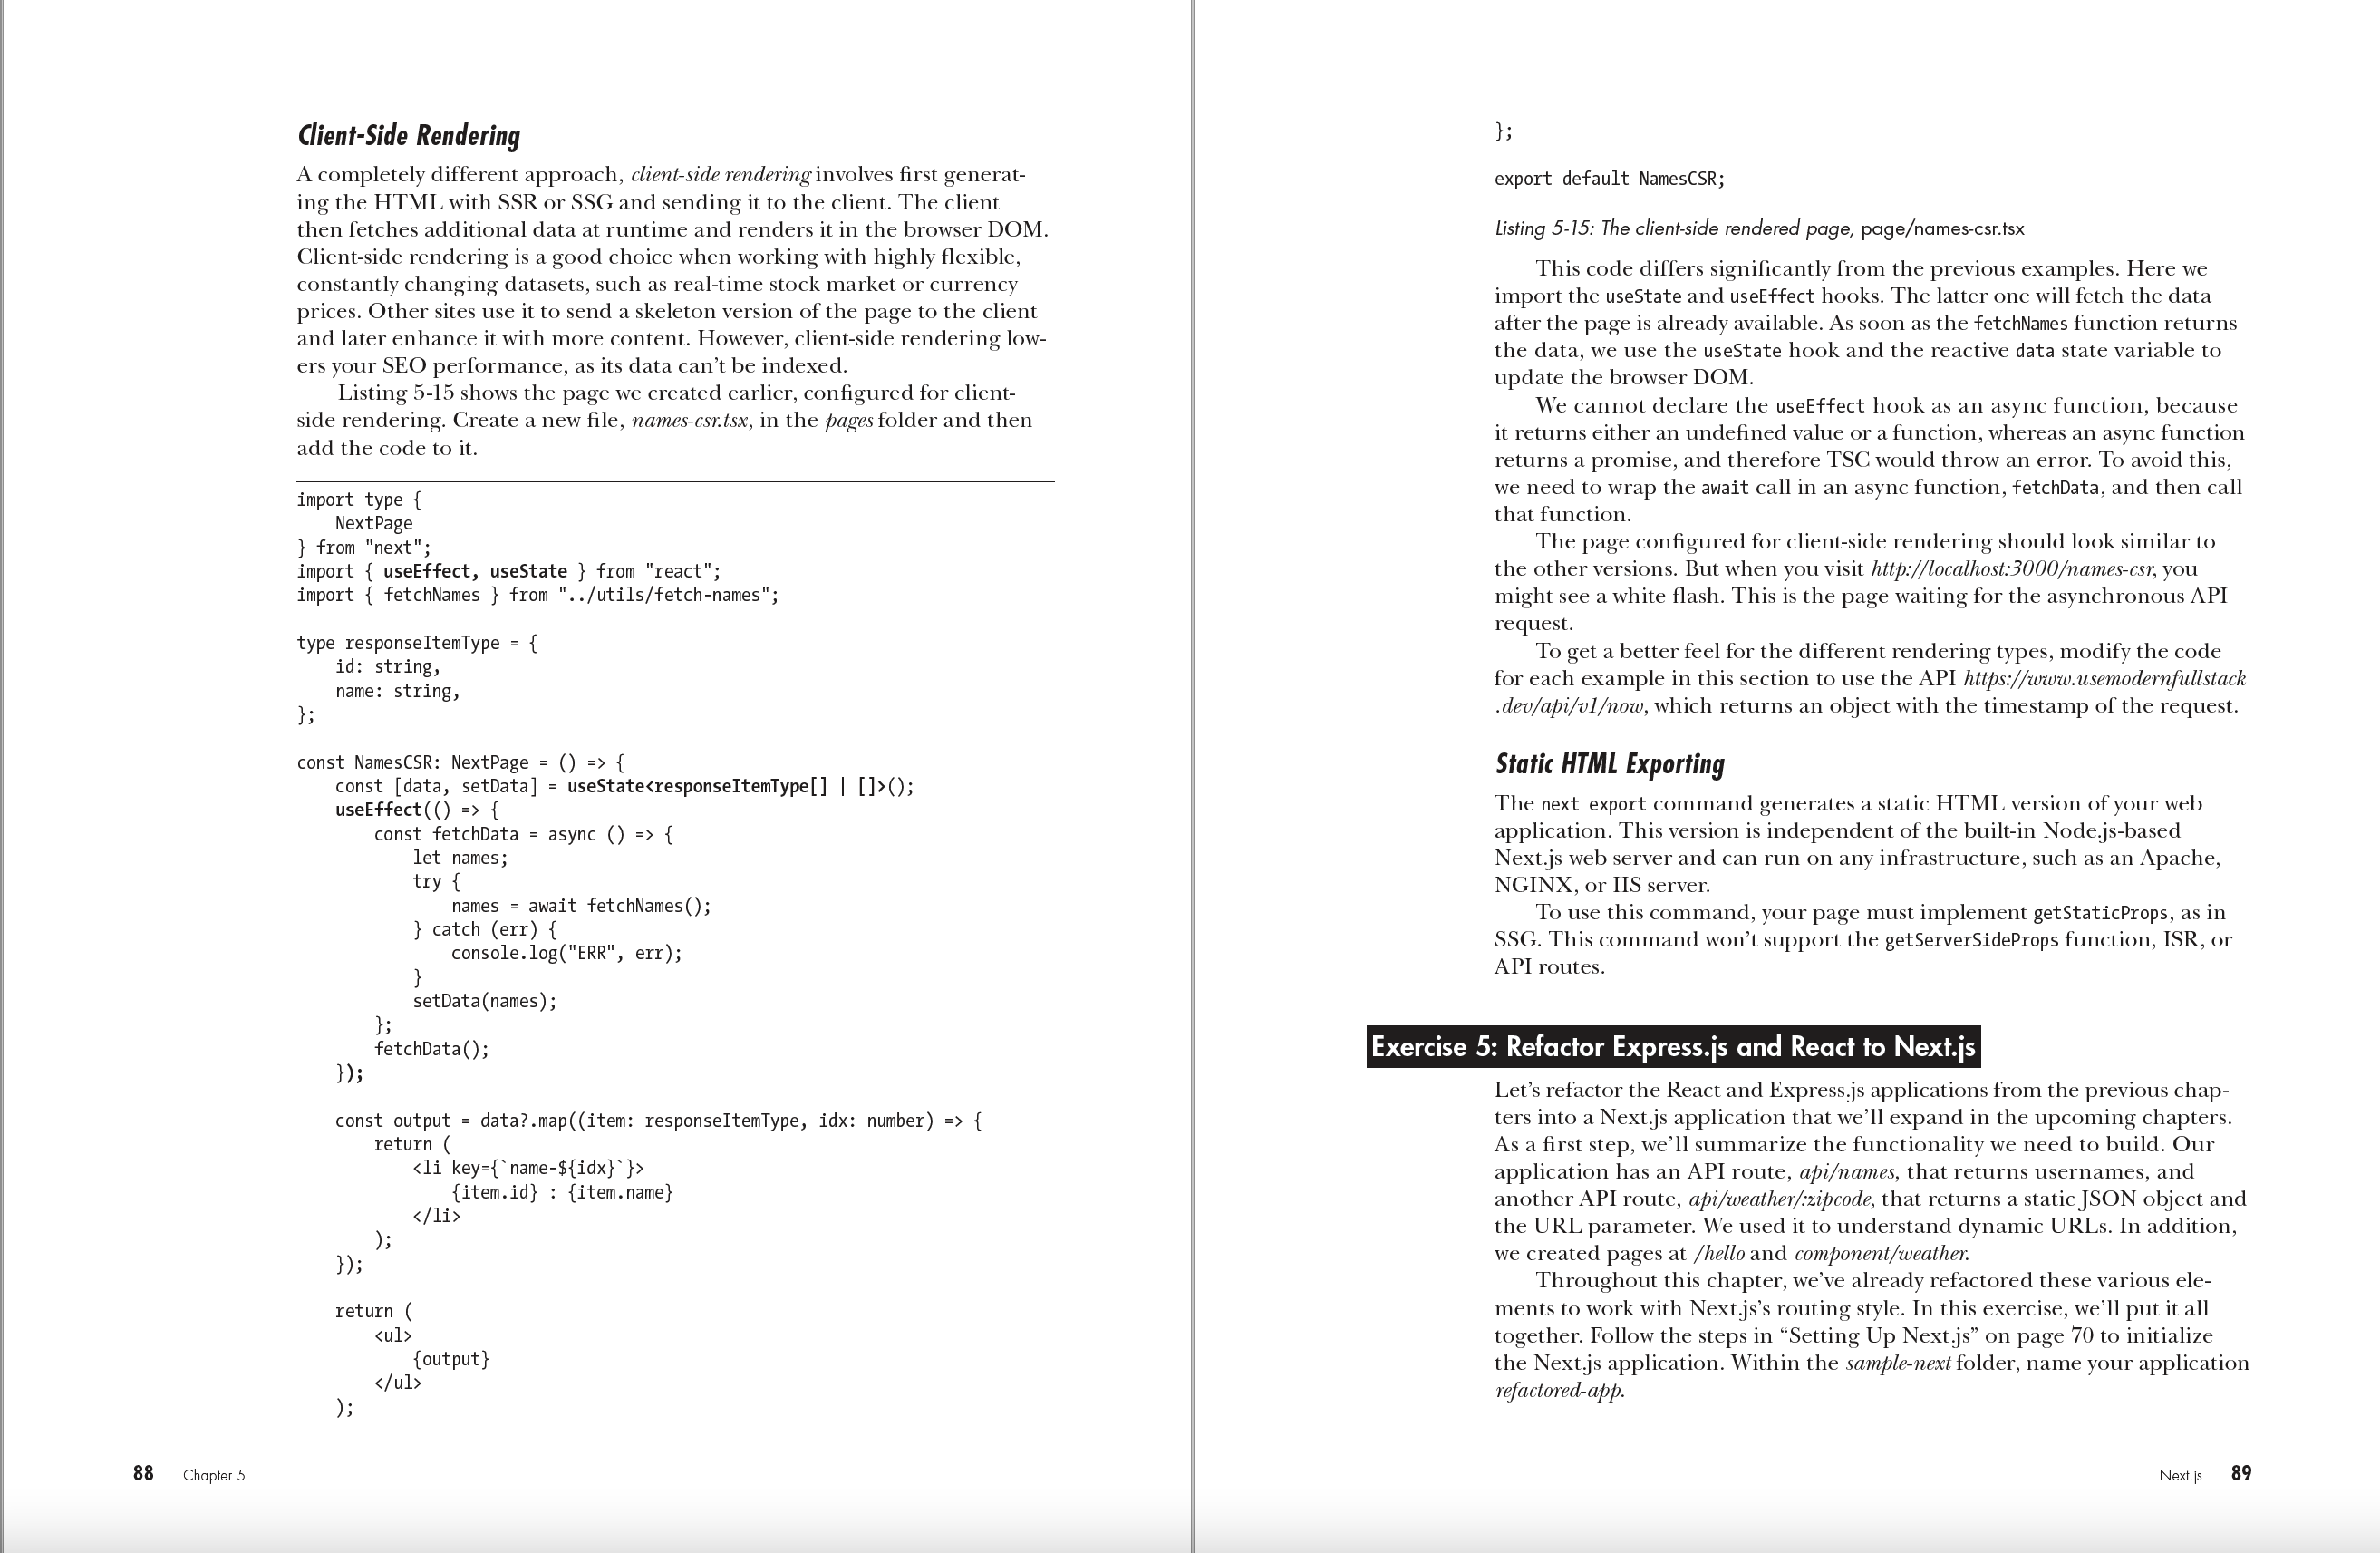 The Complete Developer pages 88-89